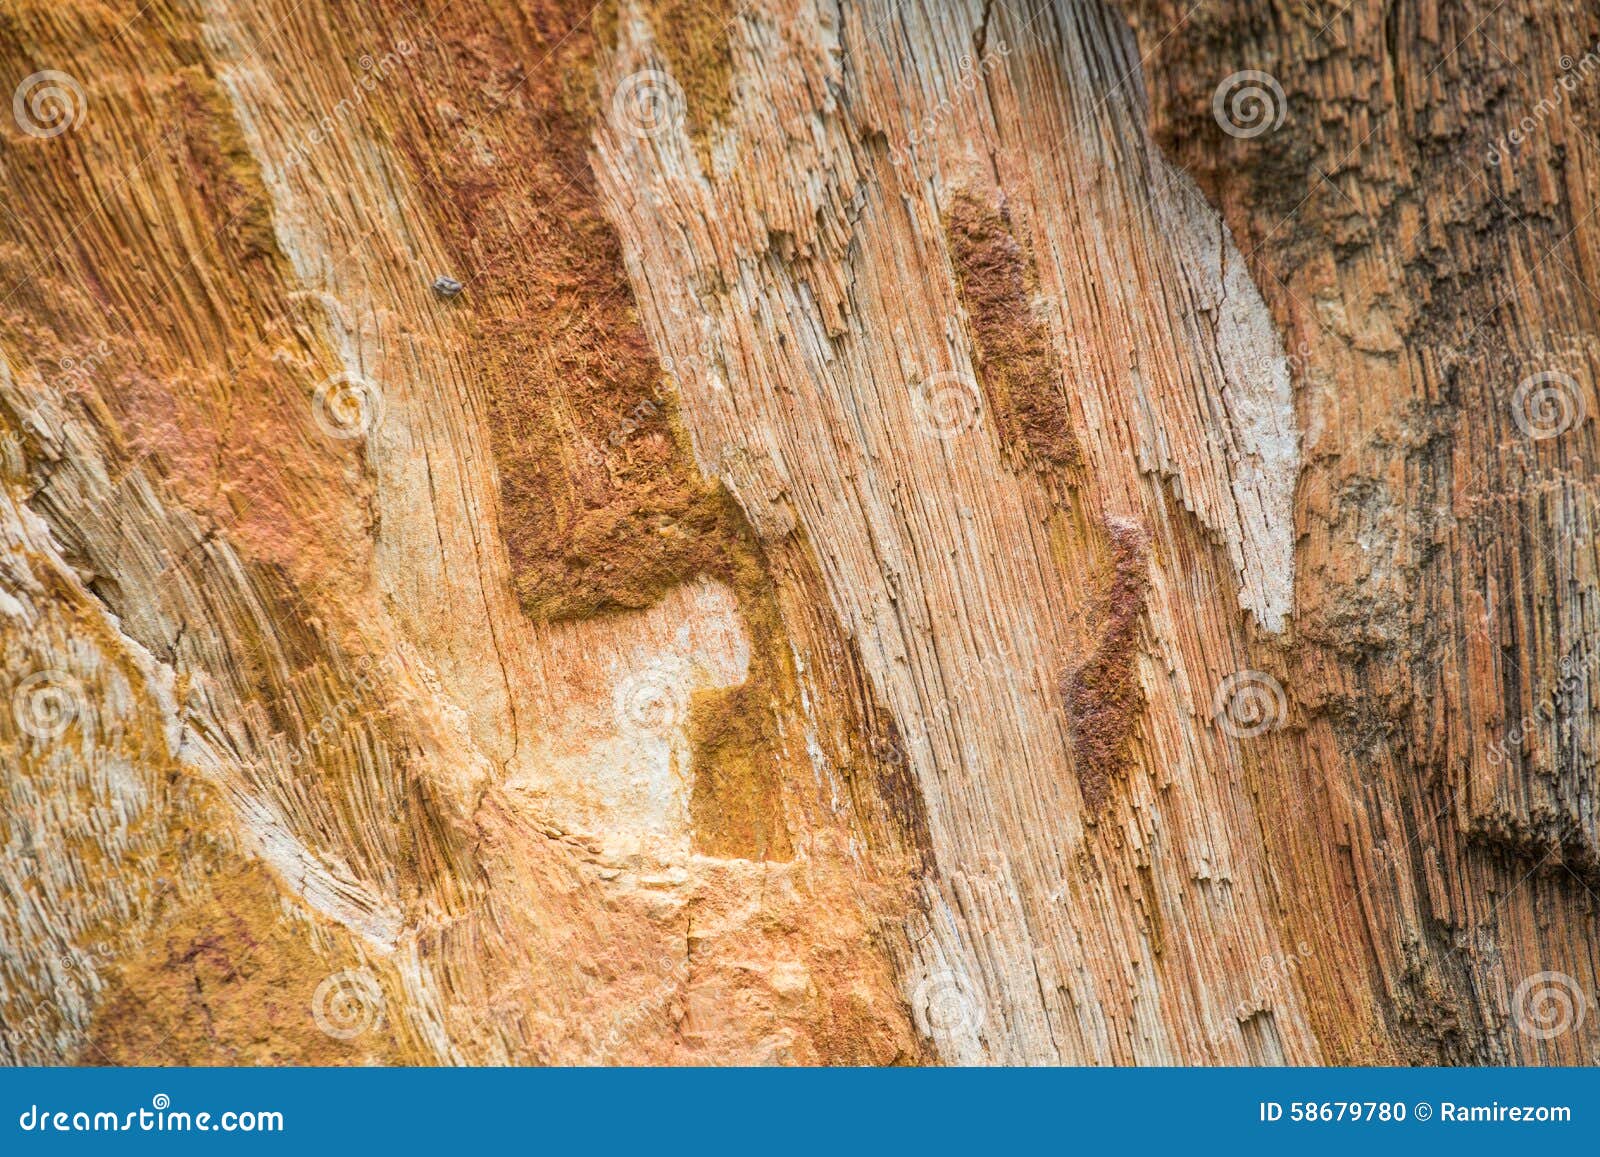 The Petrified Wood Texture Background